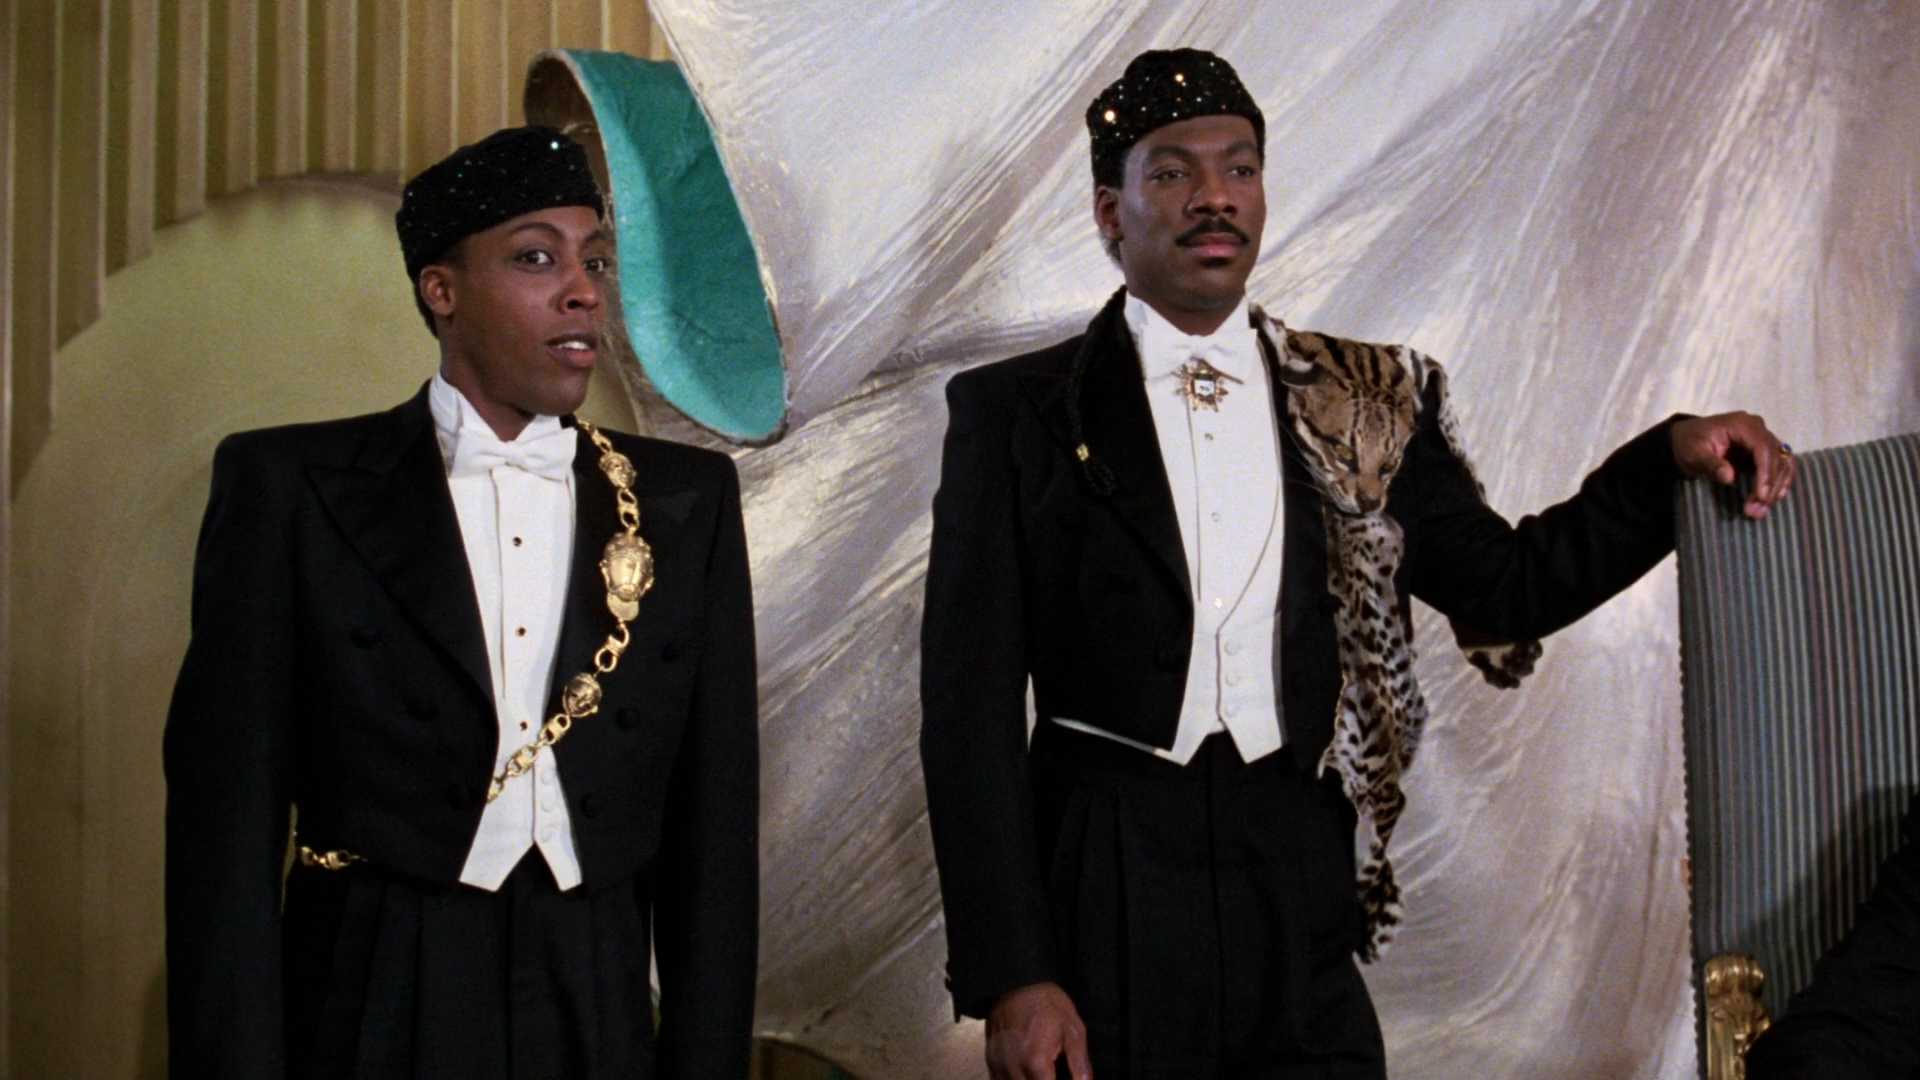 6 Things You May Not Know About 'Coming to America'